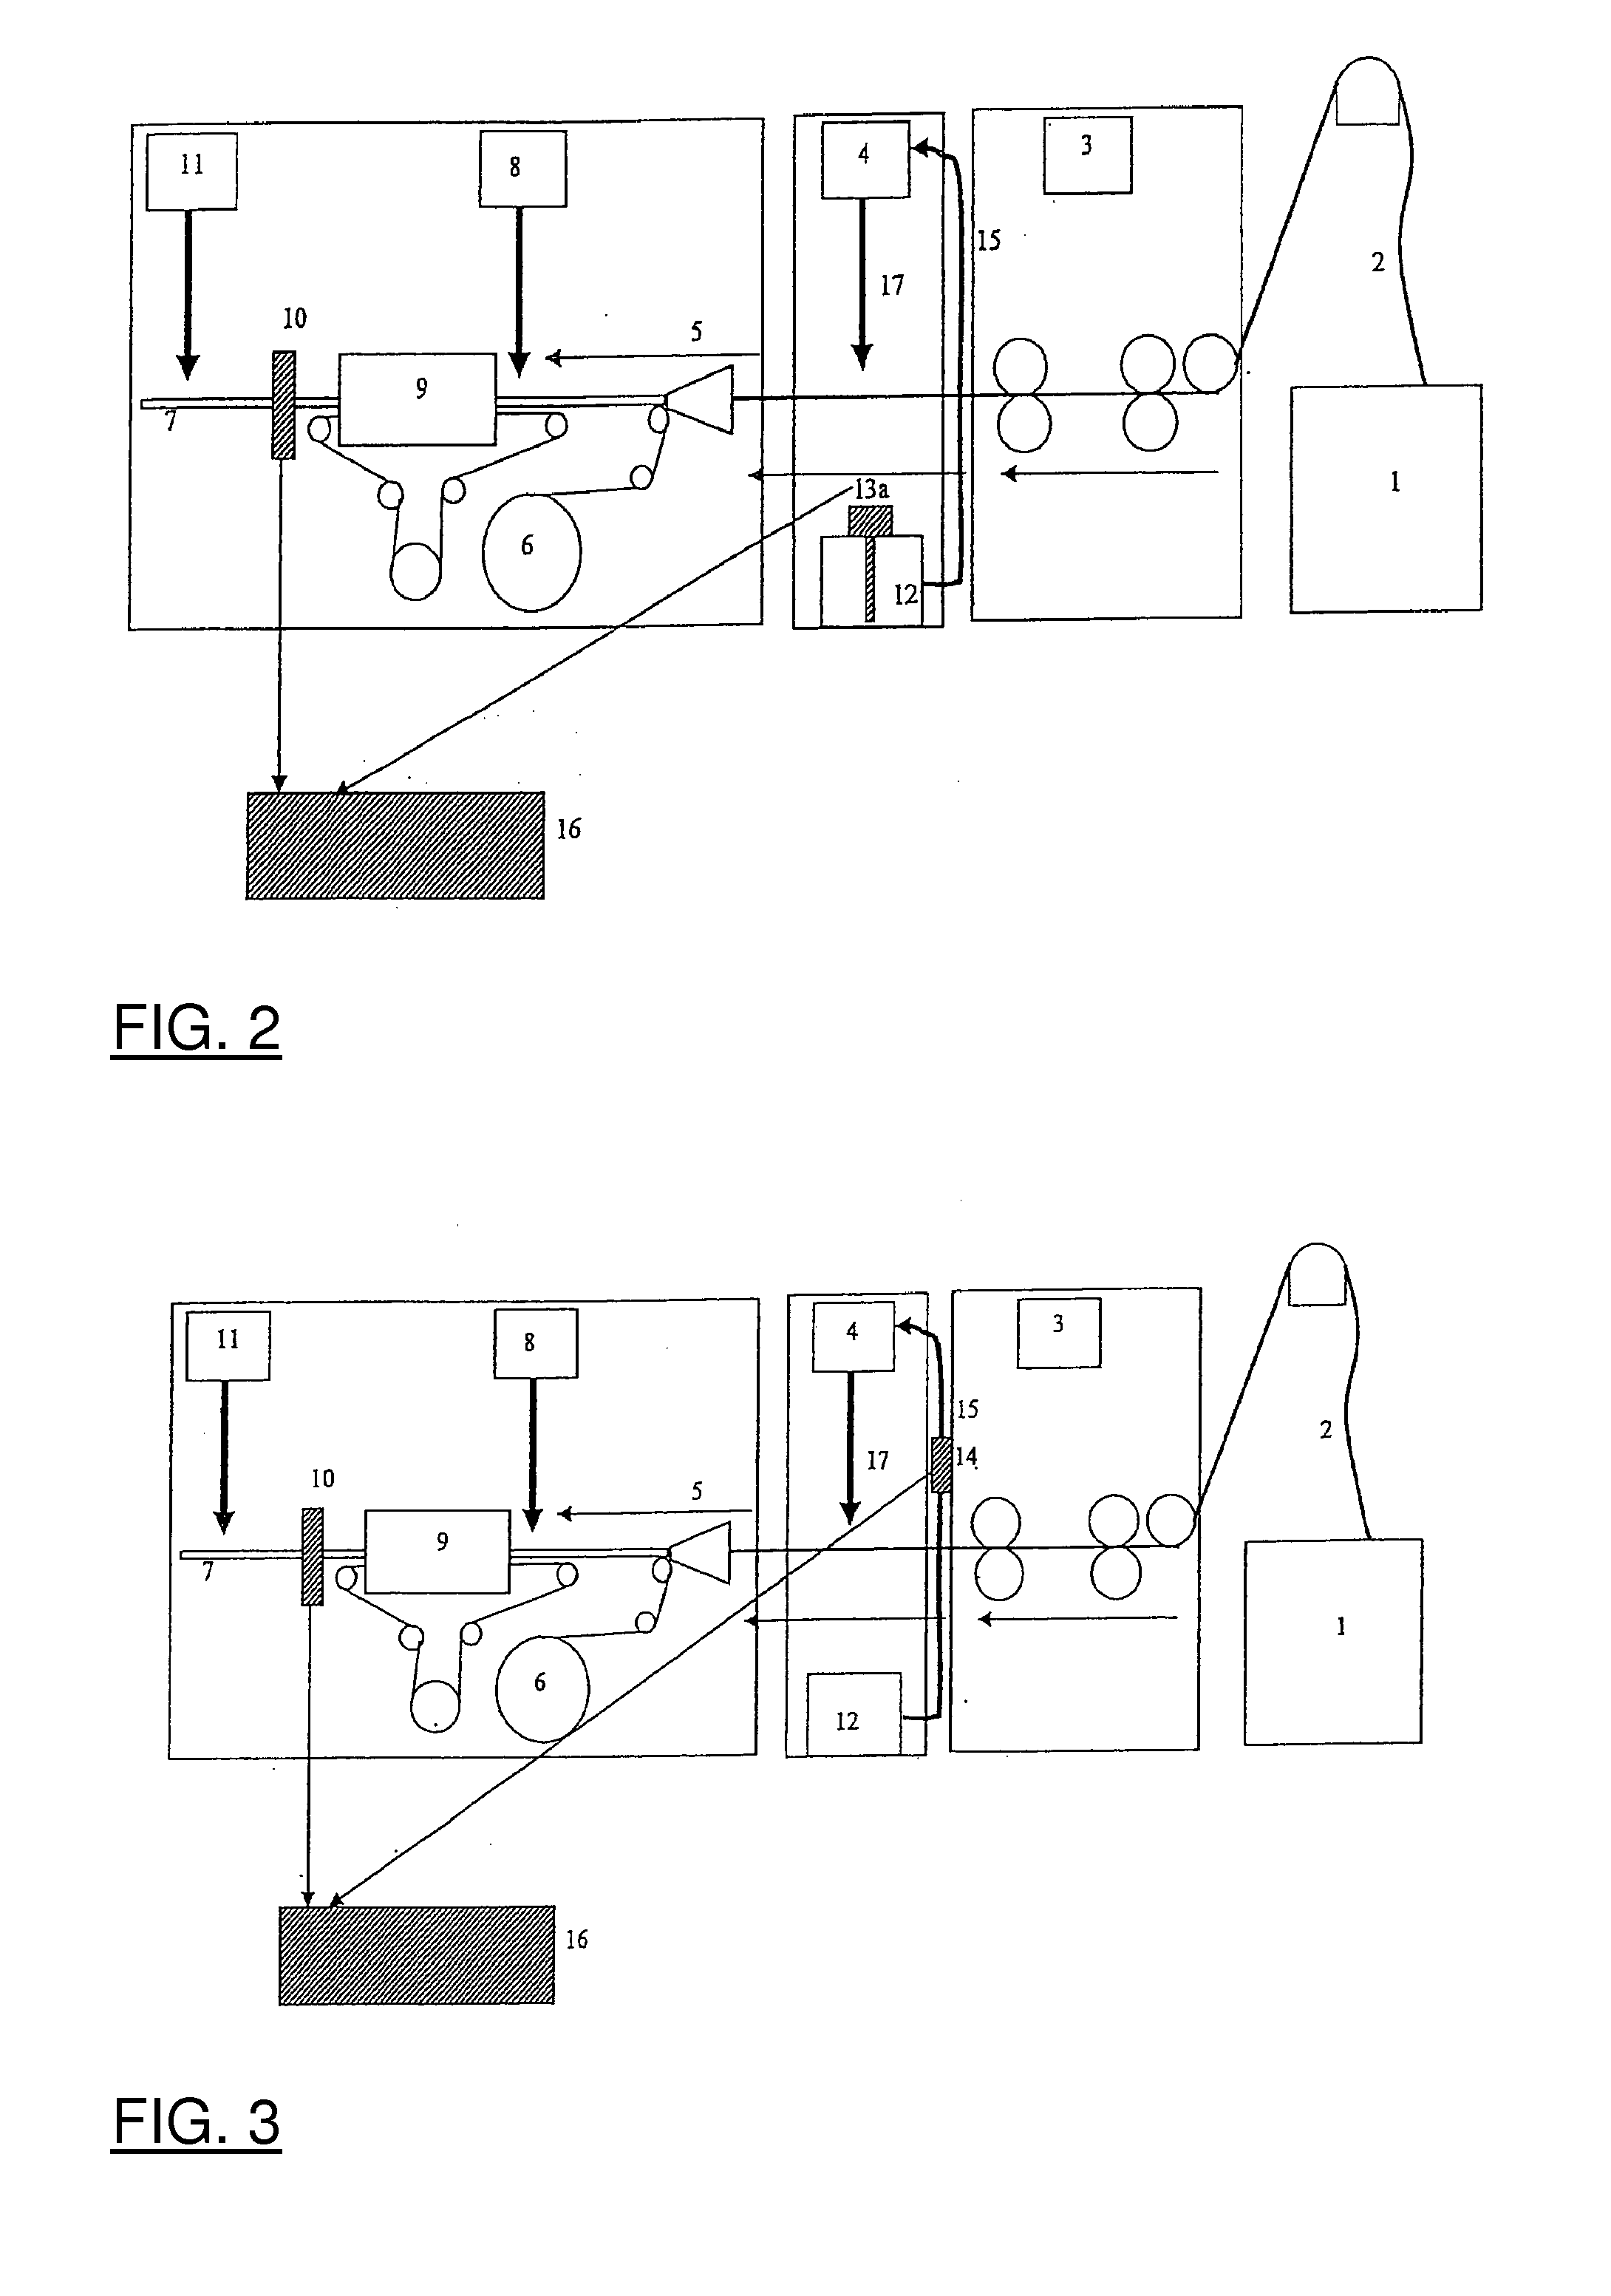 Method for online measurement of a plasticizer in an endless filter rod and a device for producing an endless filter rod of the tobacco processing industry